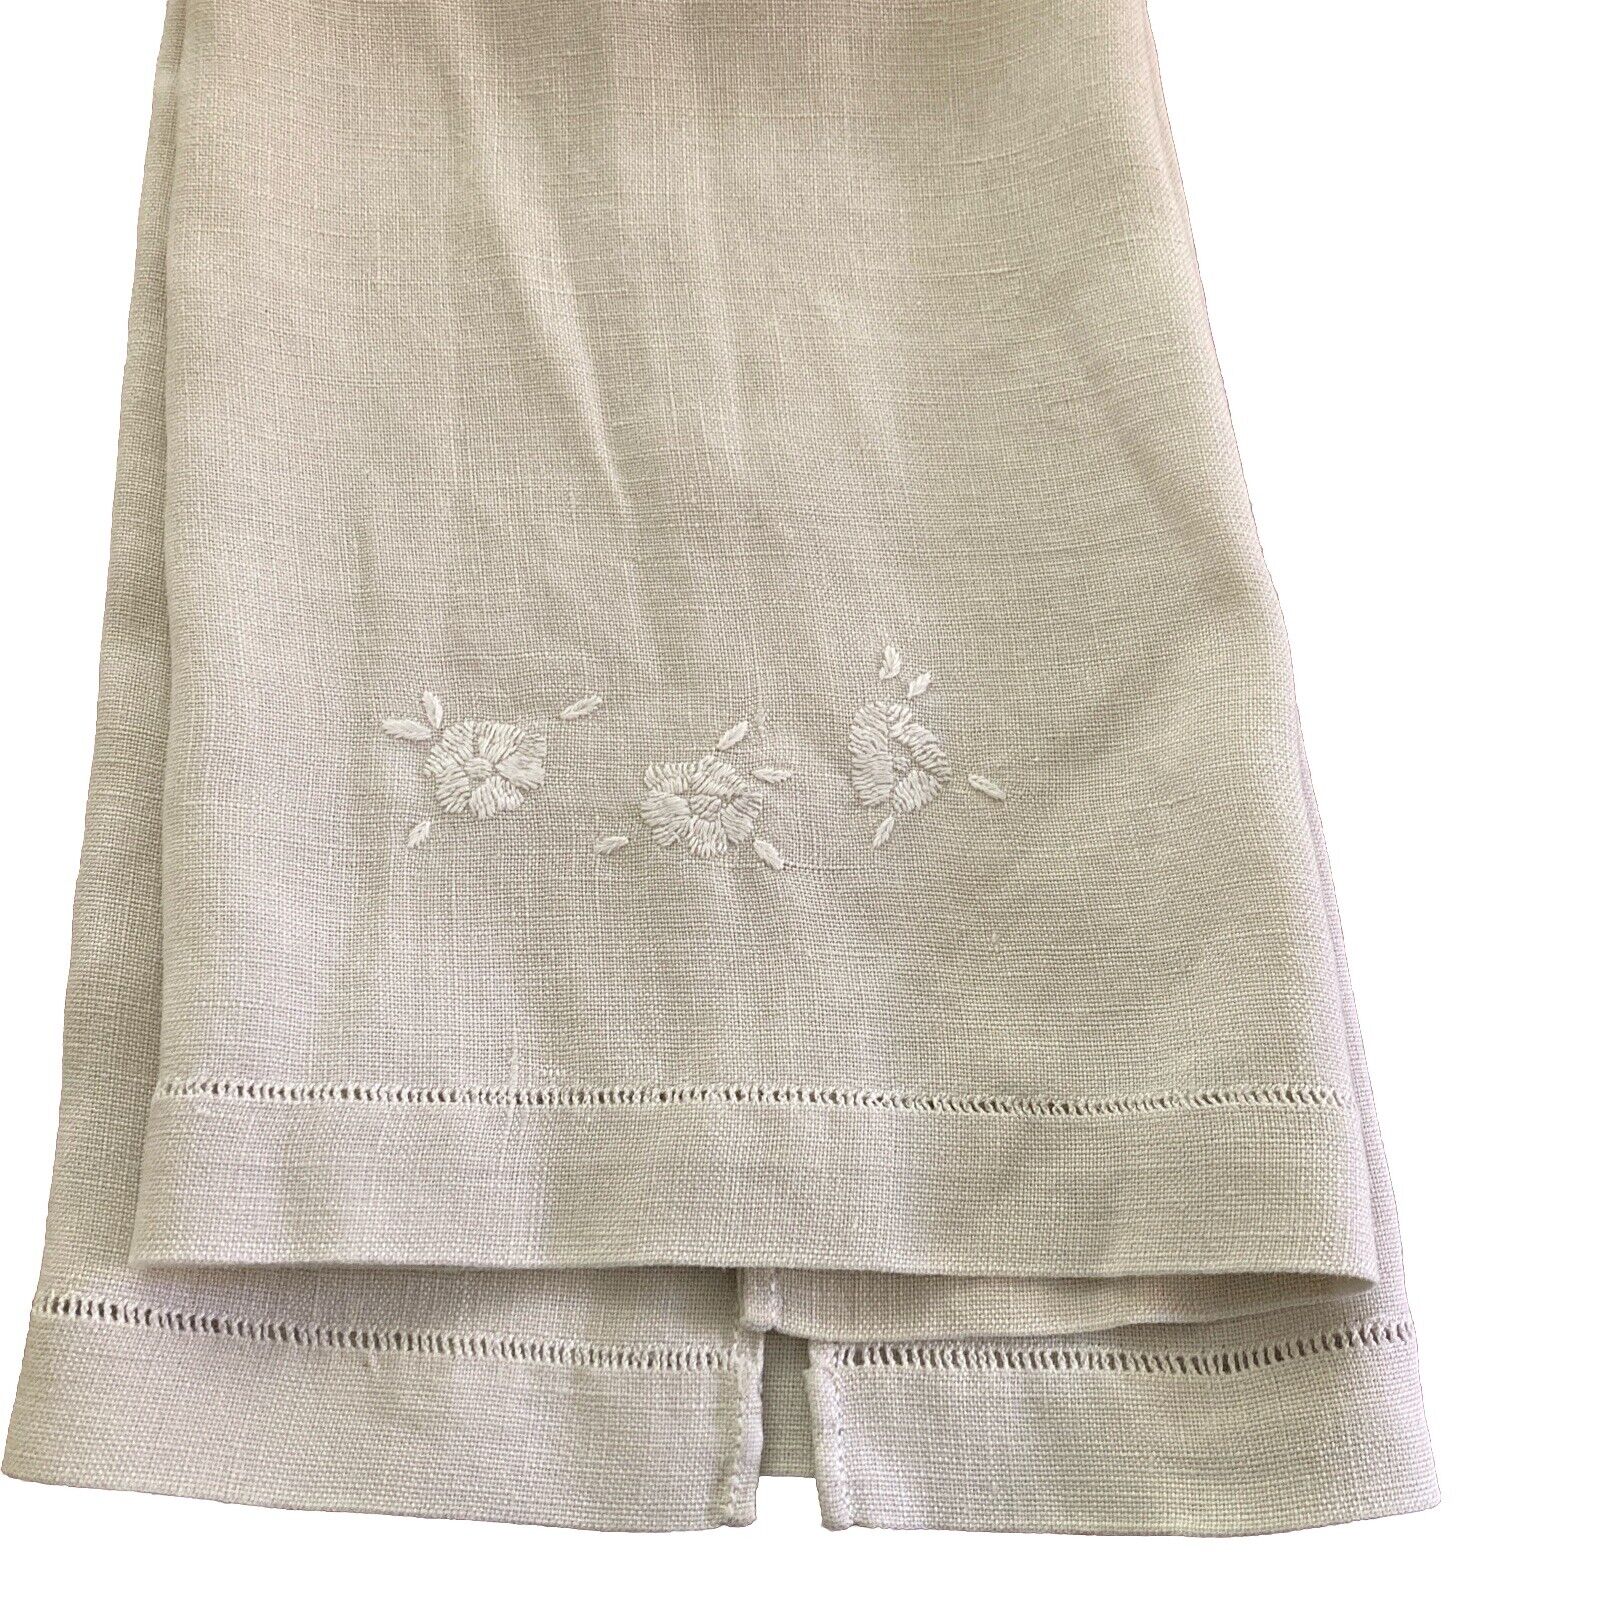 Vintage White On Gray Hand Embroidered Flowers, Pulled Thread Linen Guest Towel